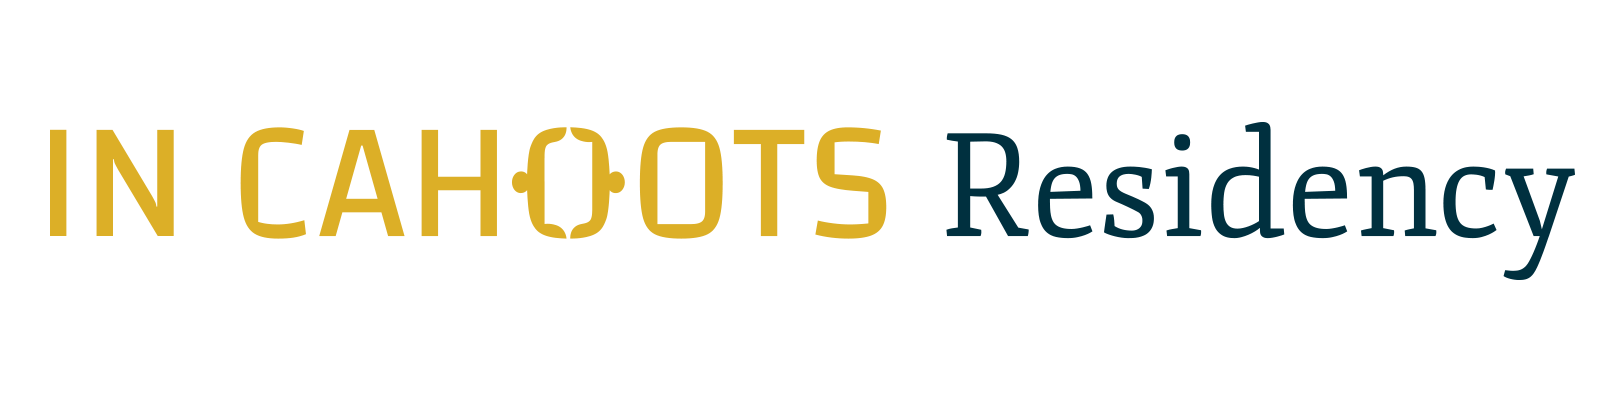 In Cahoots logo